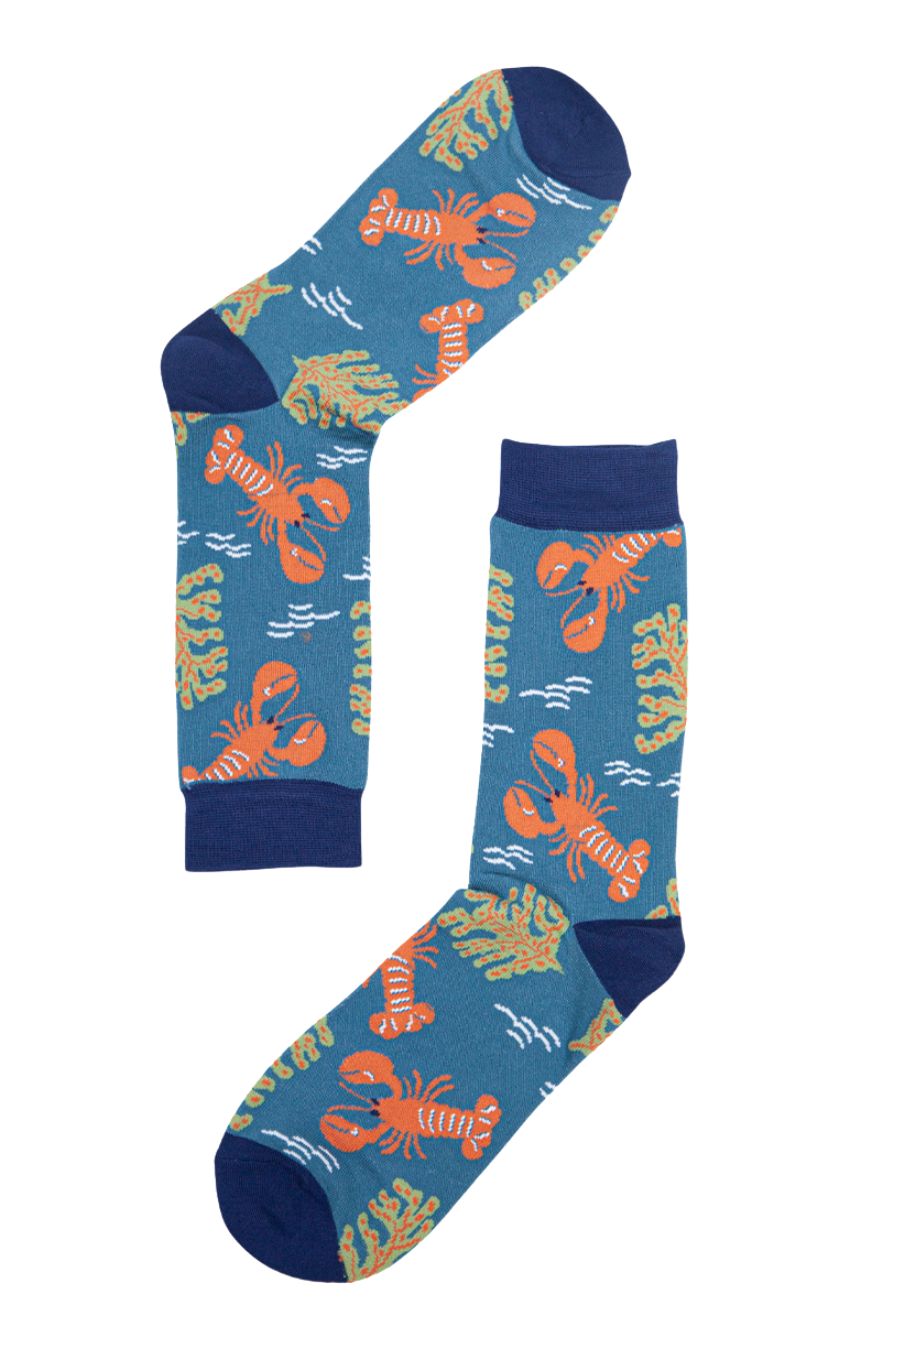 blue bamboo socks with lobsters and seaweed